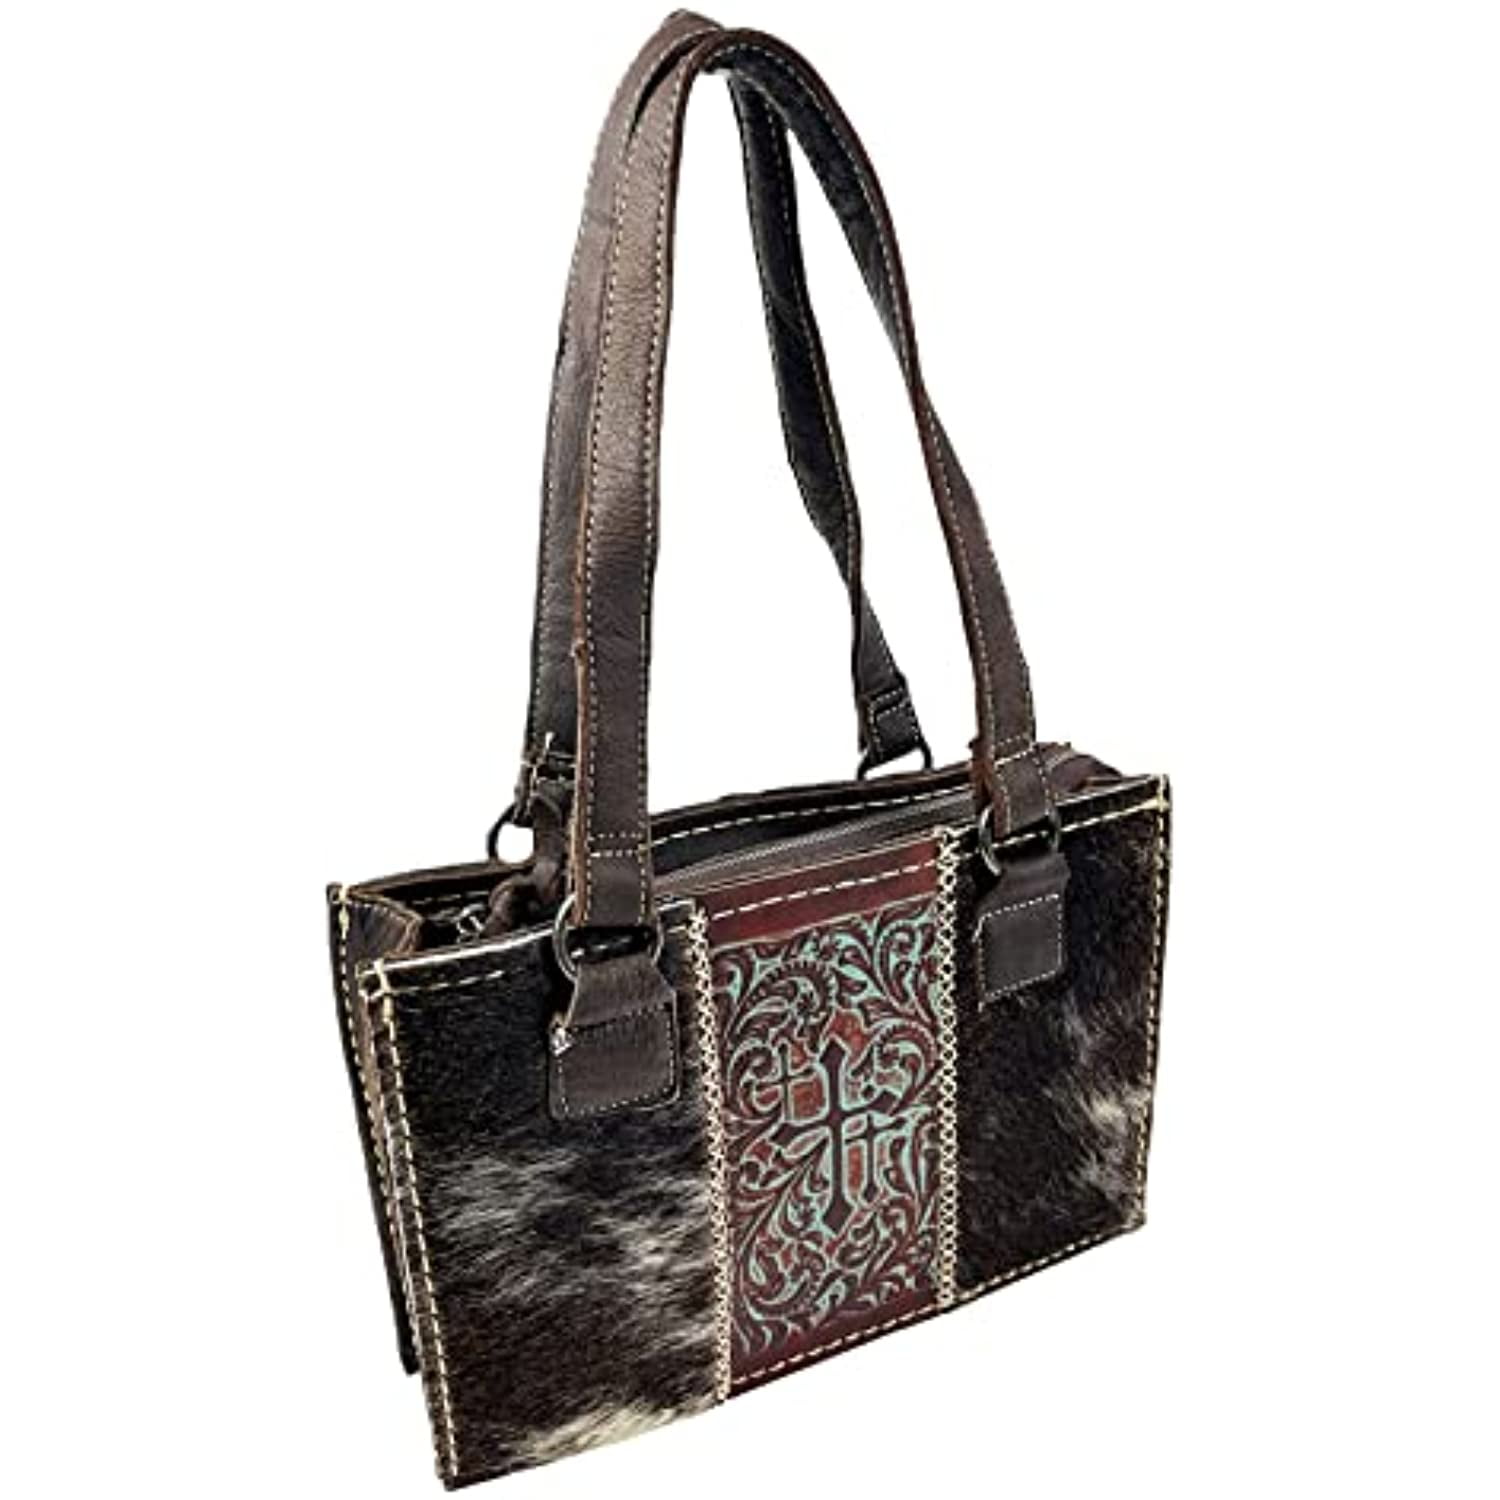 Urbalabs Western Genuine CowHair Tooled Crosses Leather Purse Handbag Tote Bag Women Zipper Hand Stitched Over Shoulder Purses In Dark Brown Dark Bro bdf4f0c4 68b6 48df a90c ad4d7f392e07.ed1d951f53deb086d609c53b74d73cb4